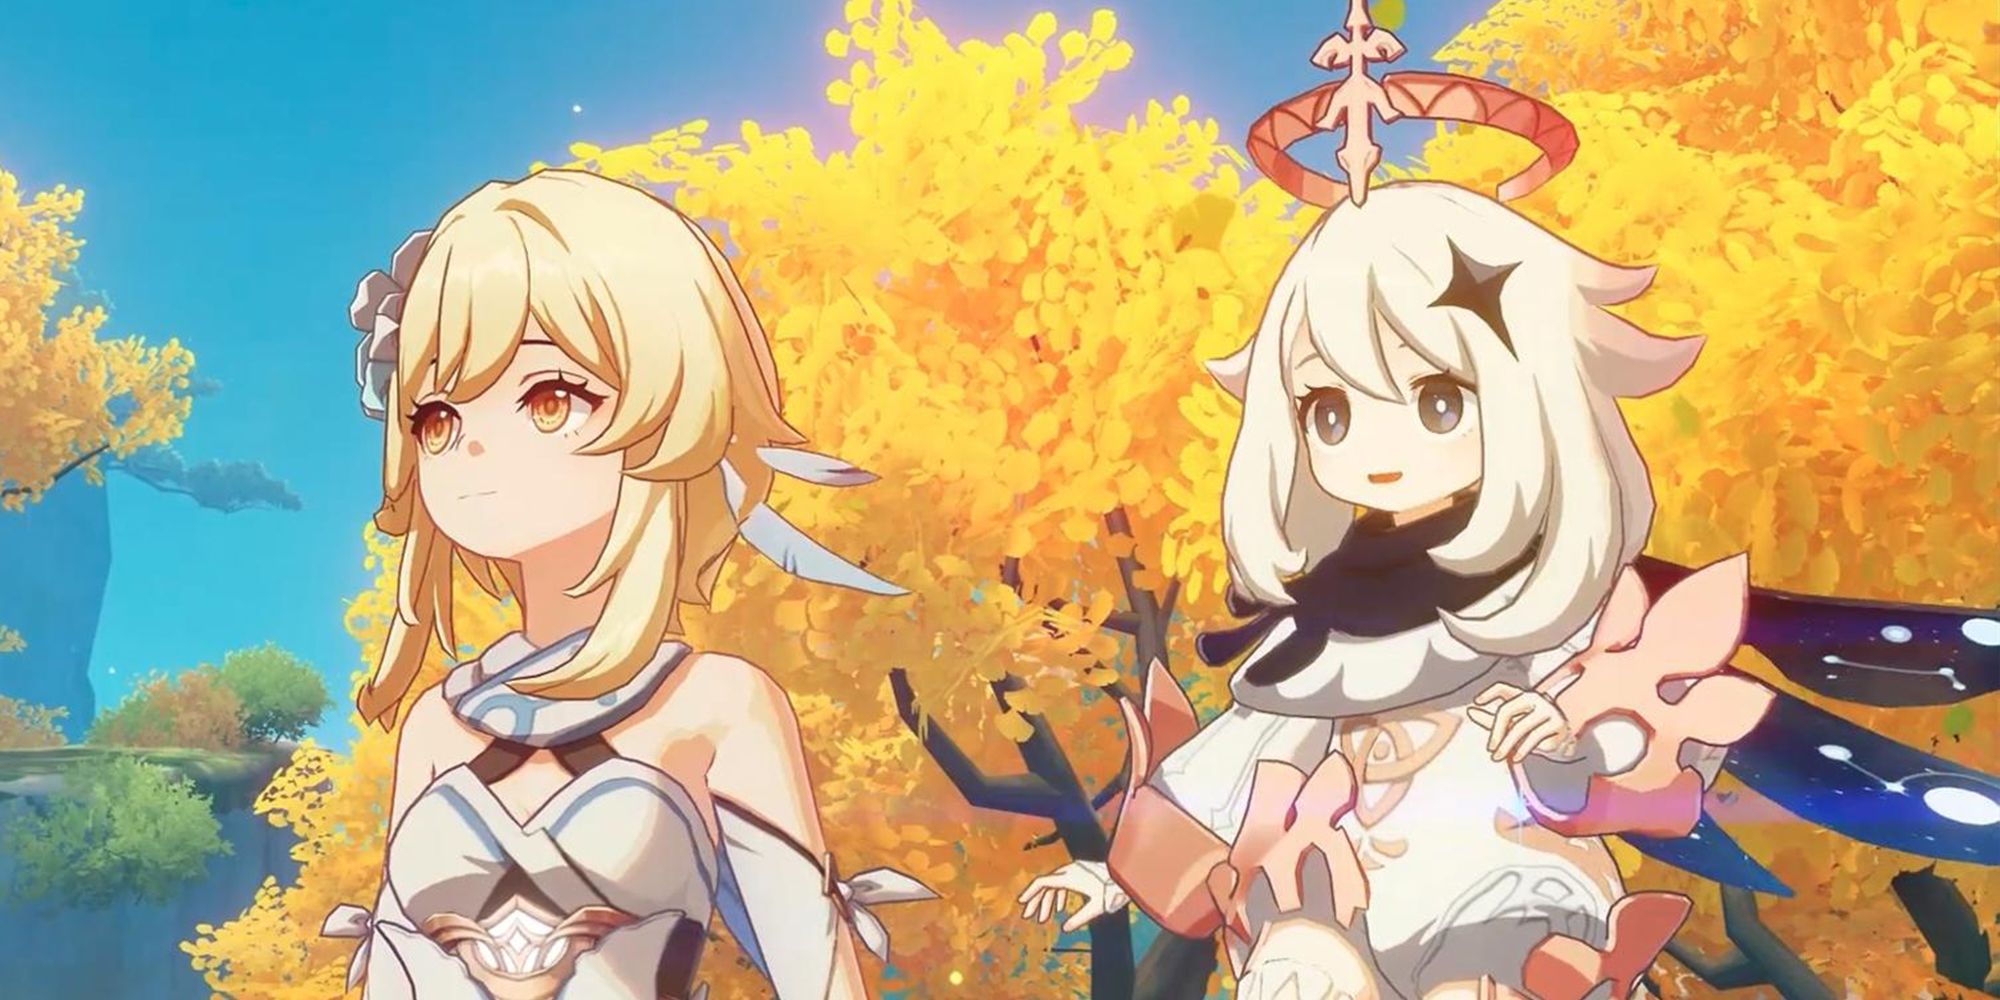 Genshin Impact Main Character and Paimon standing side by side with trees in background